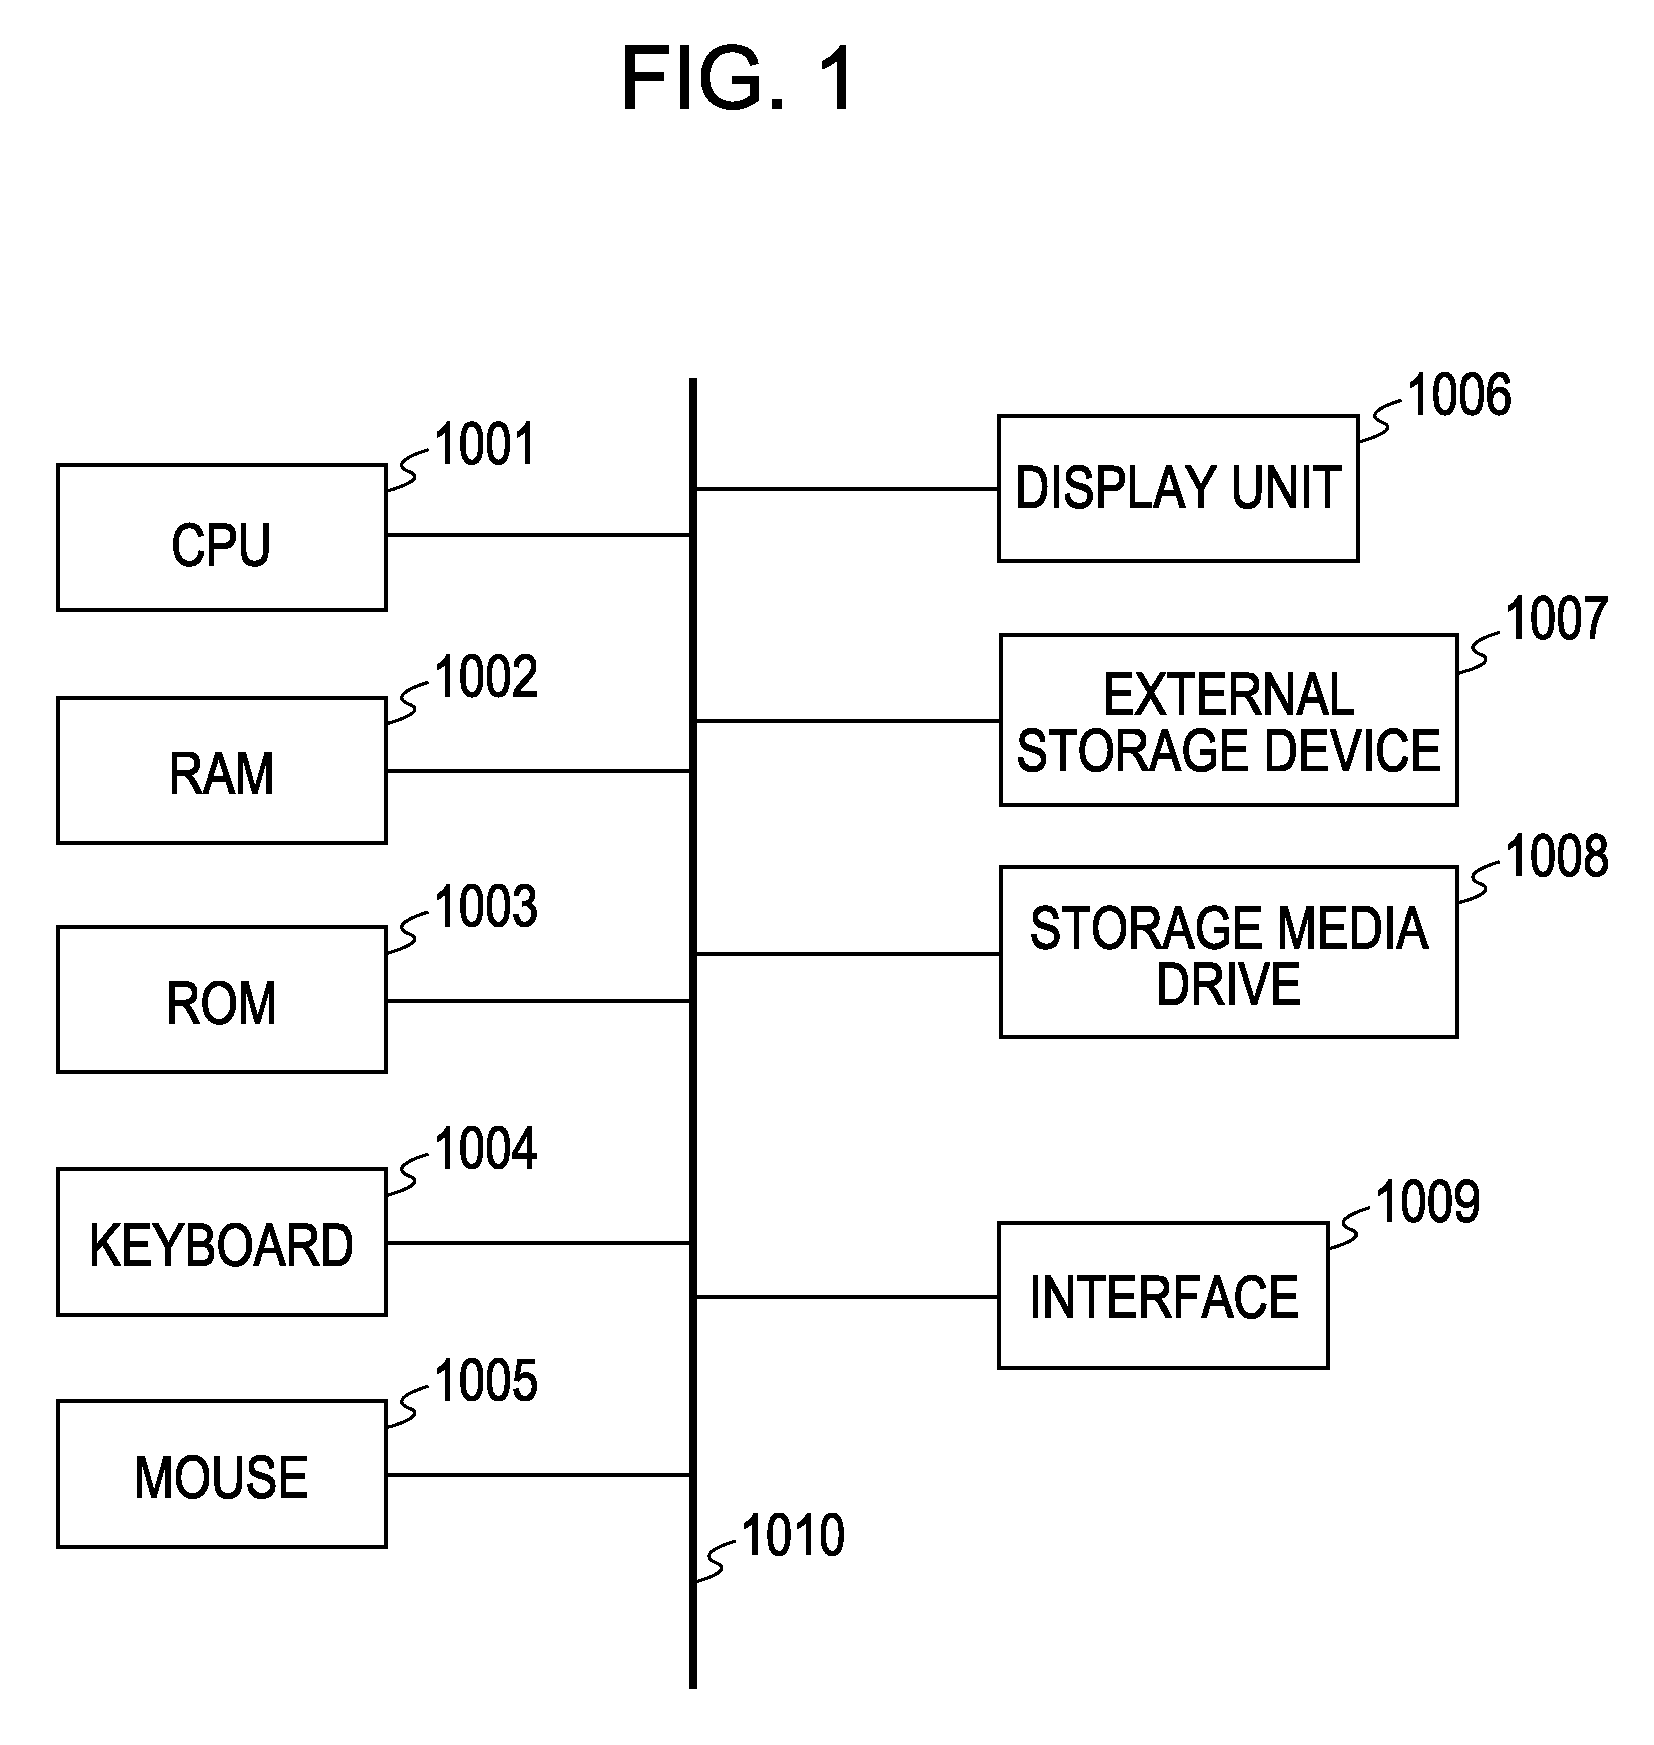 Information processing method and device for presenting haptics received from a virtual object